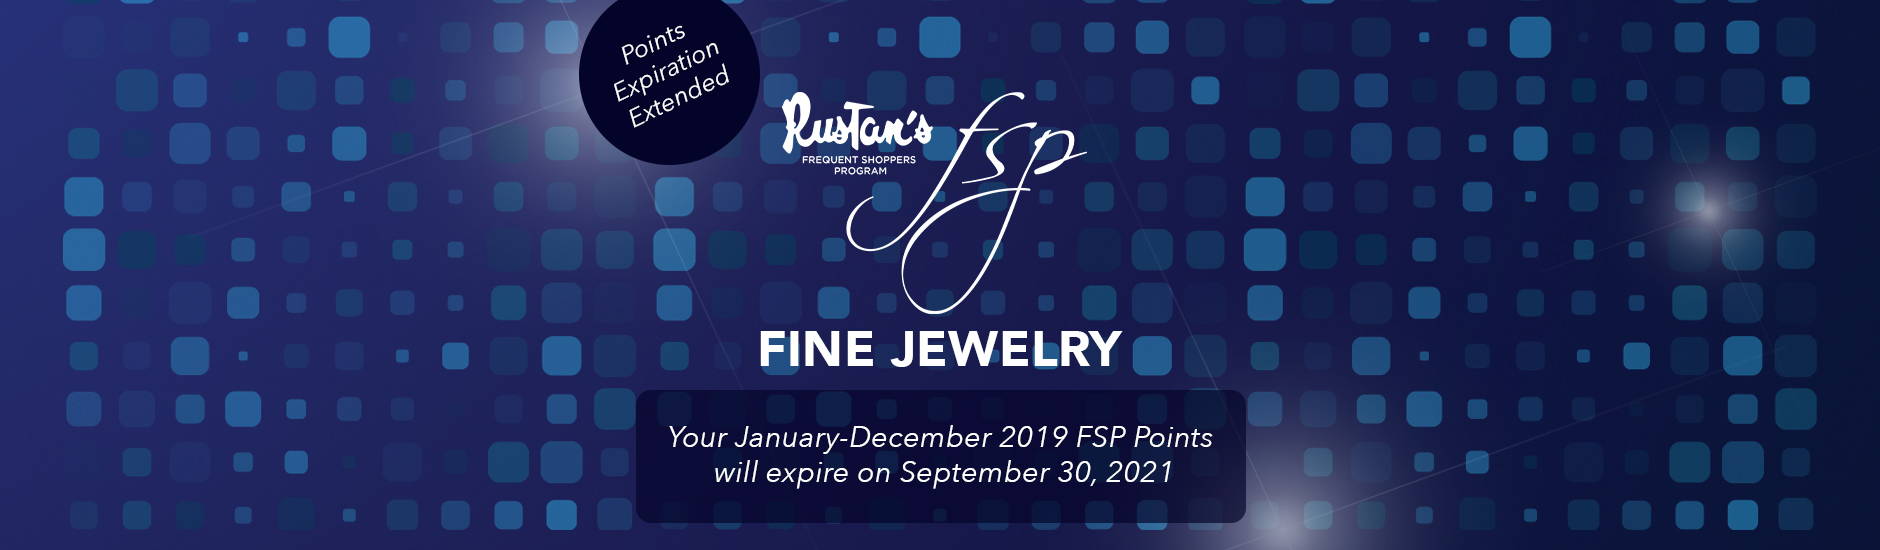 EXTENDED: Your FSP Points Are Waiting - Fine Jewelry